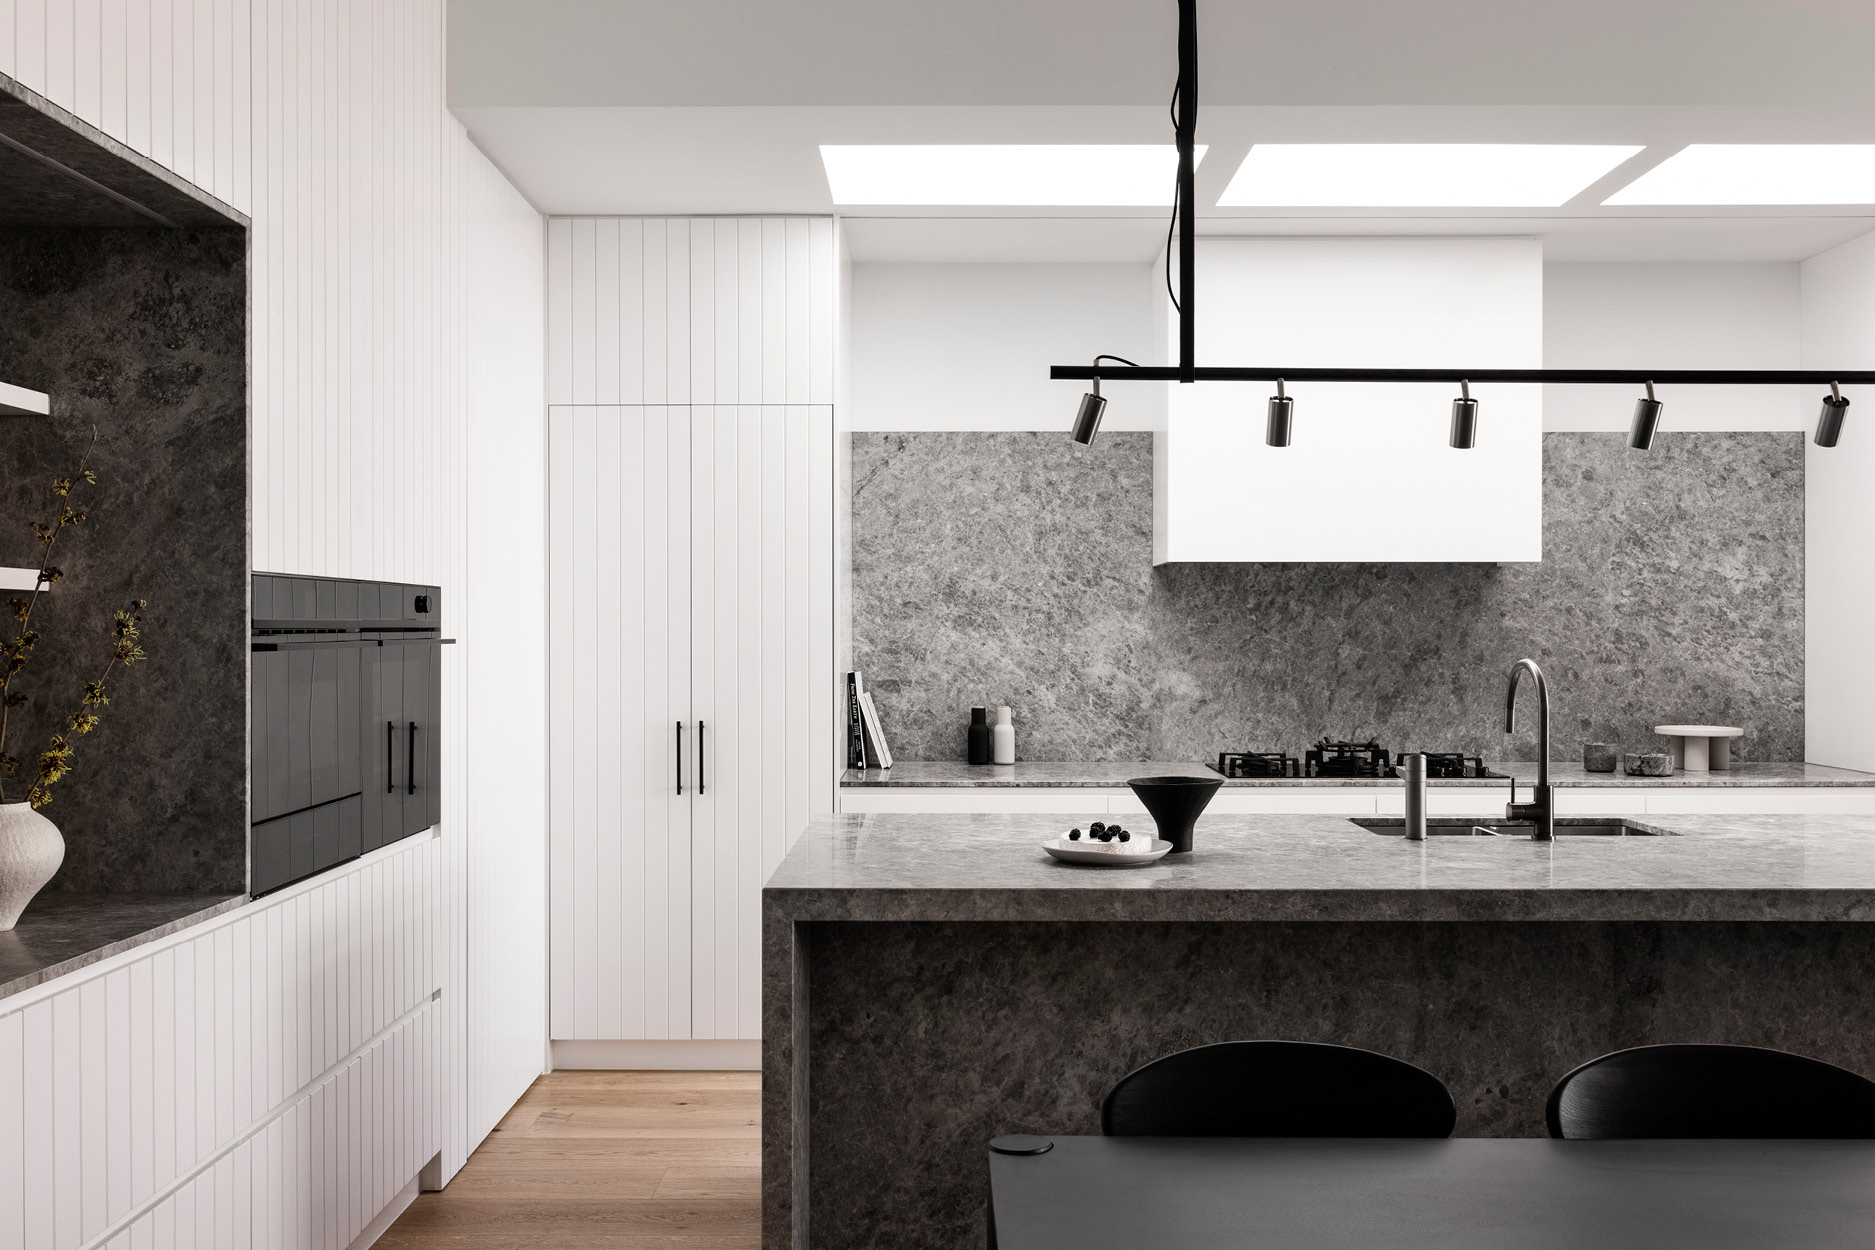 Using Fisher & Paykel appliances, this kitchen is a minimalist haven